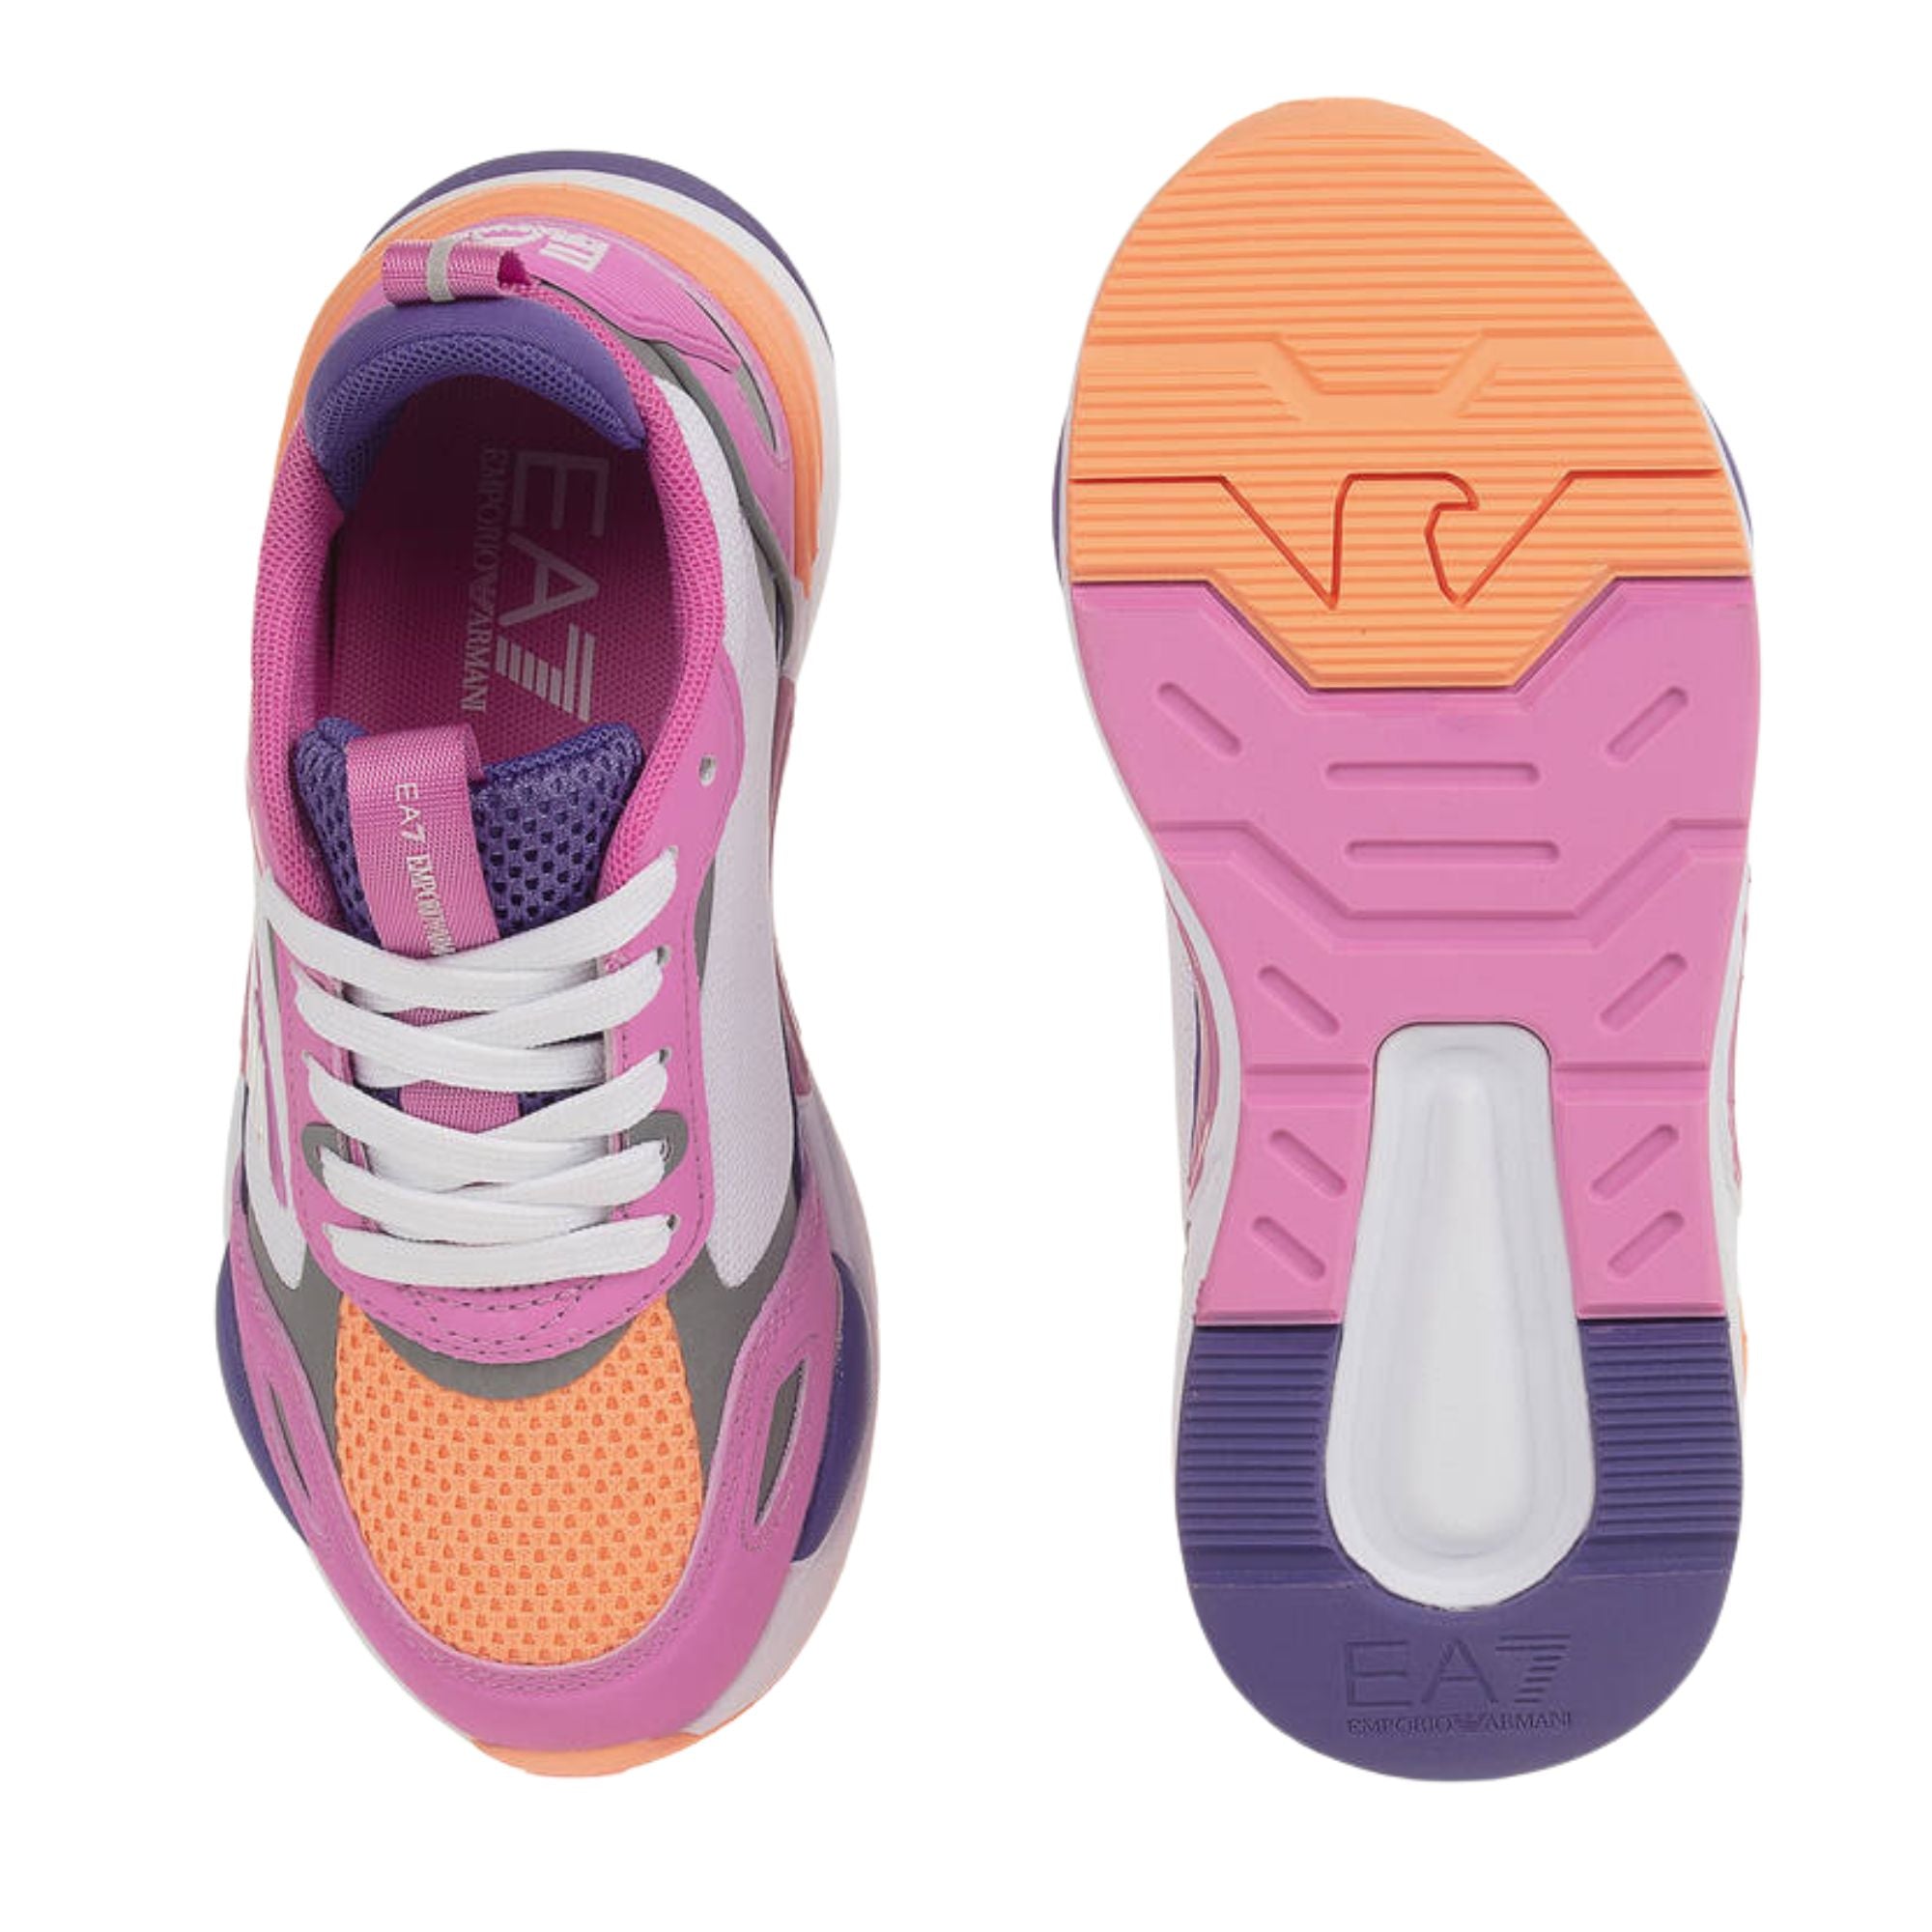 Emporio Armani Ace Runner Pink Sneakers